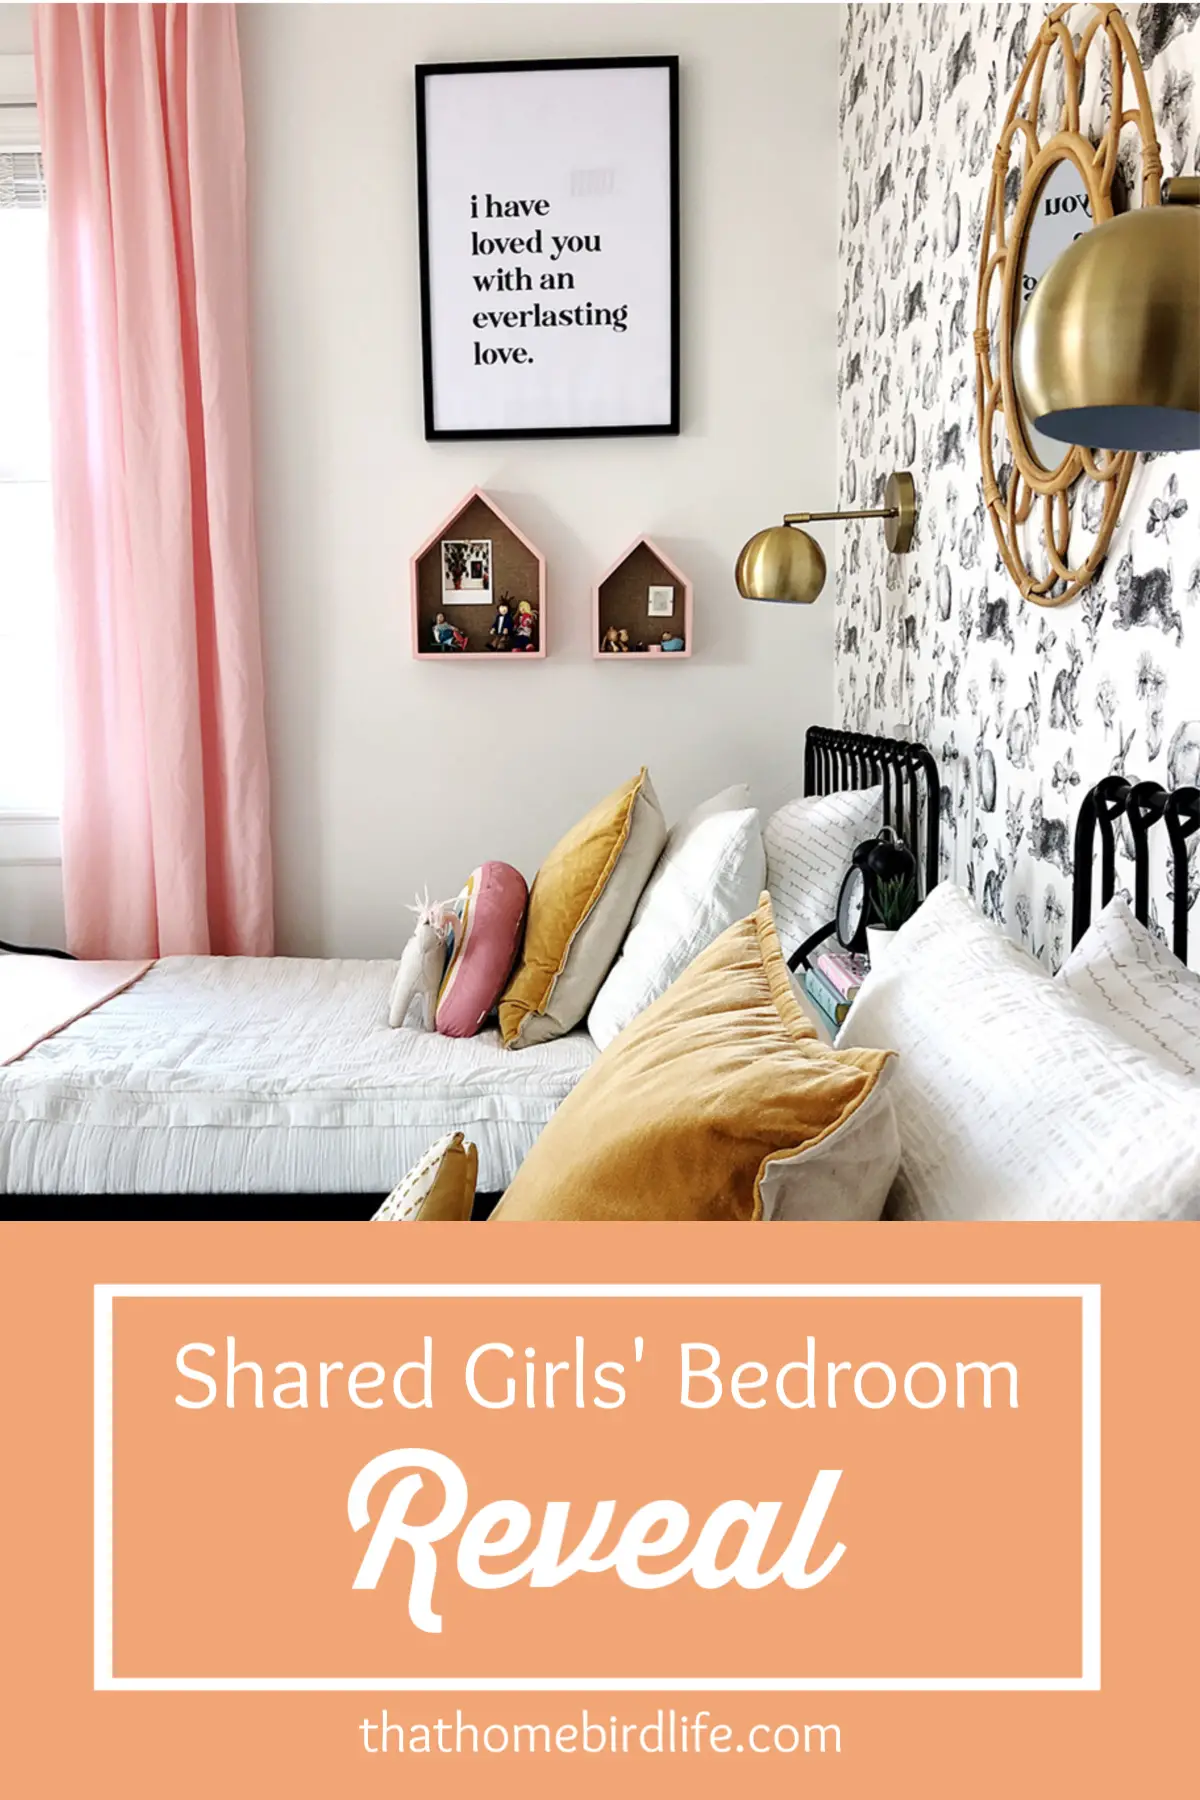 shared girls bedroom with text overlay